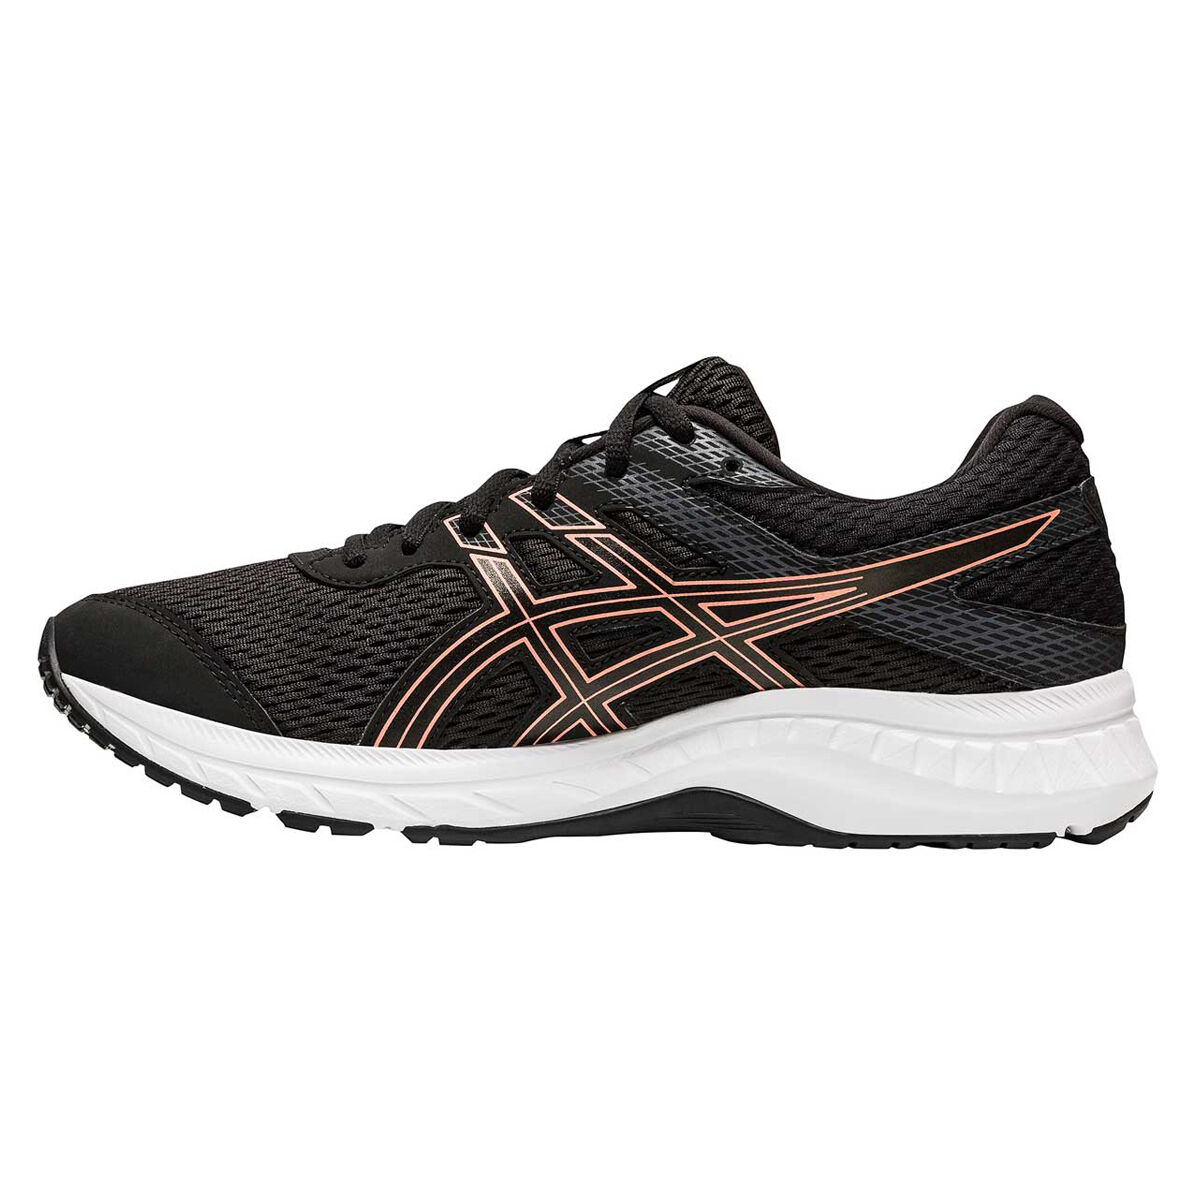 Womens Running Shoes Black/Rose Gold 